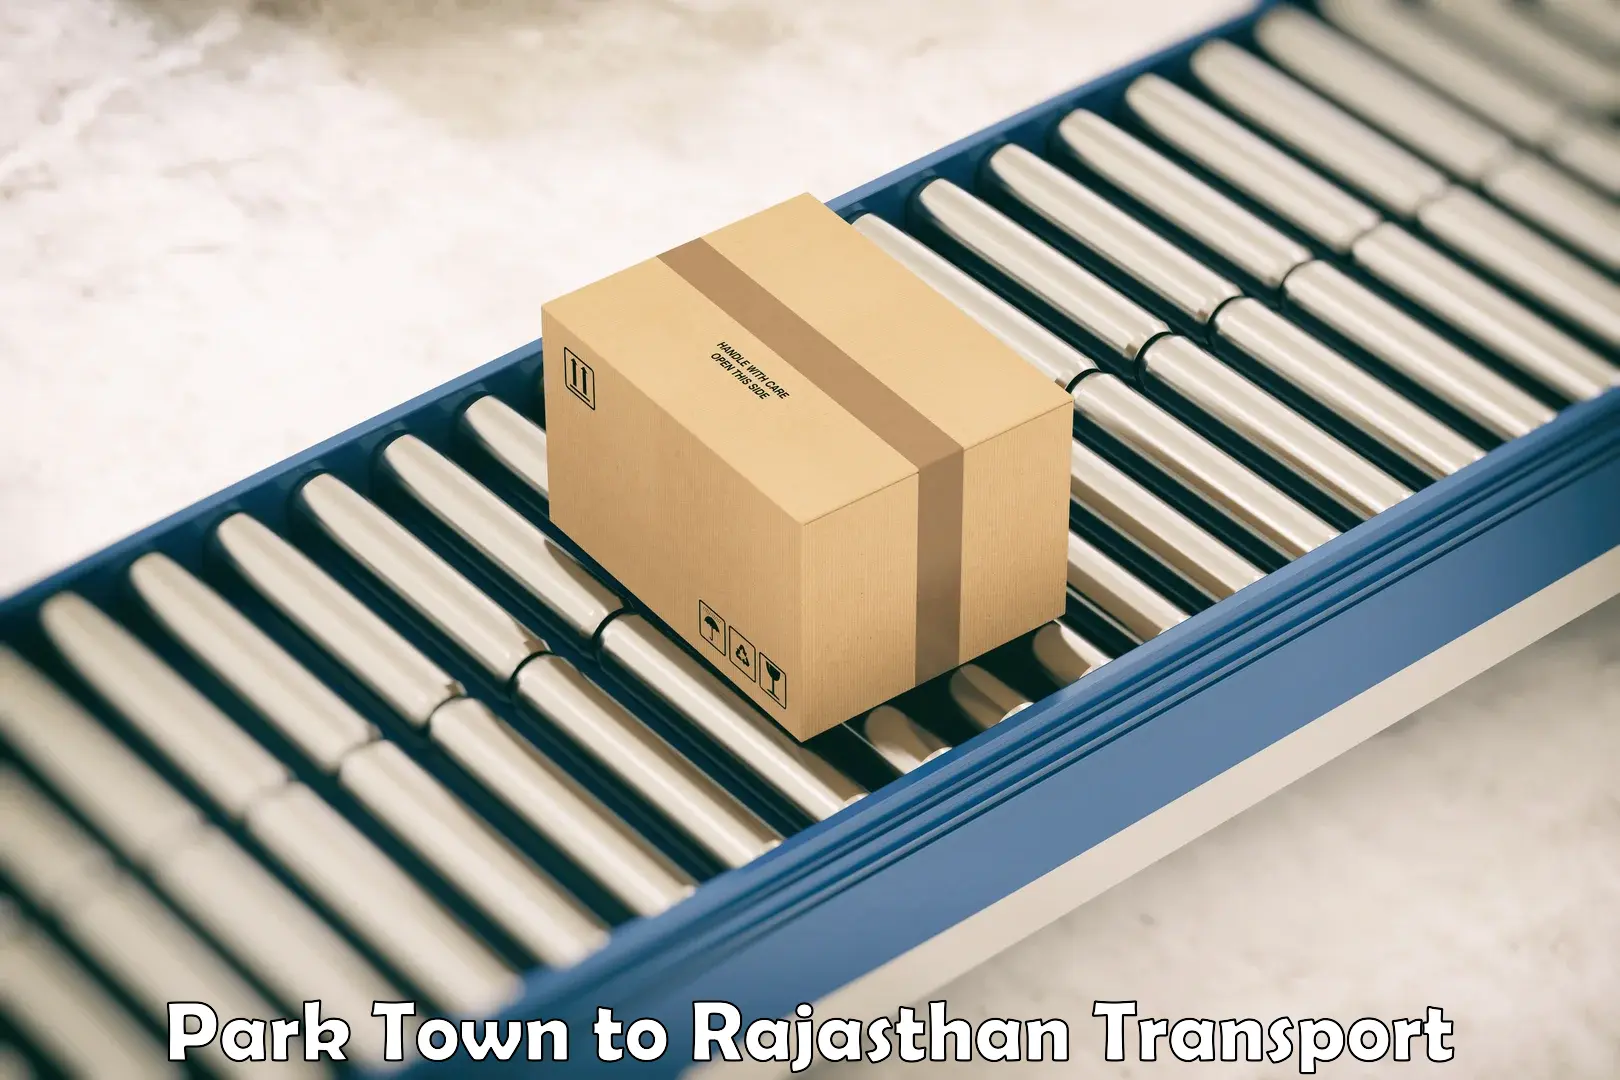 Container transport service Park Town to Rajasthan